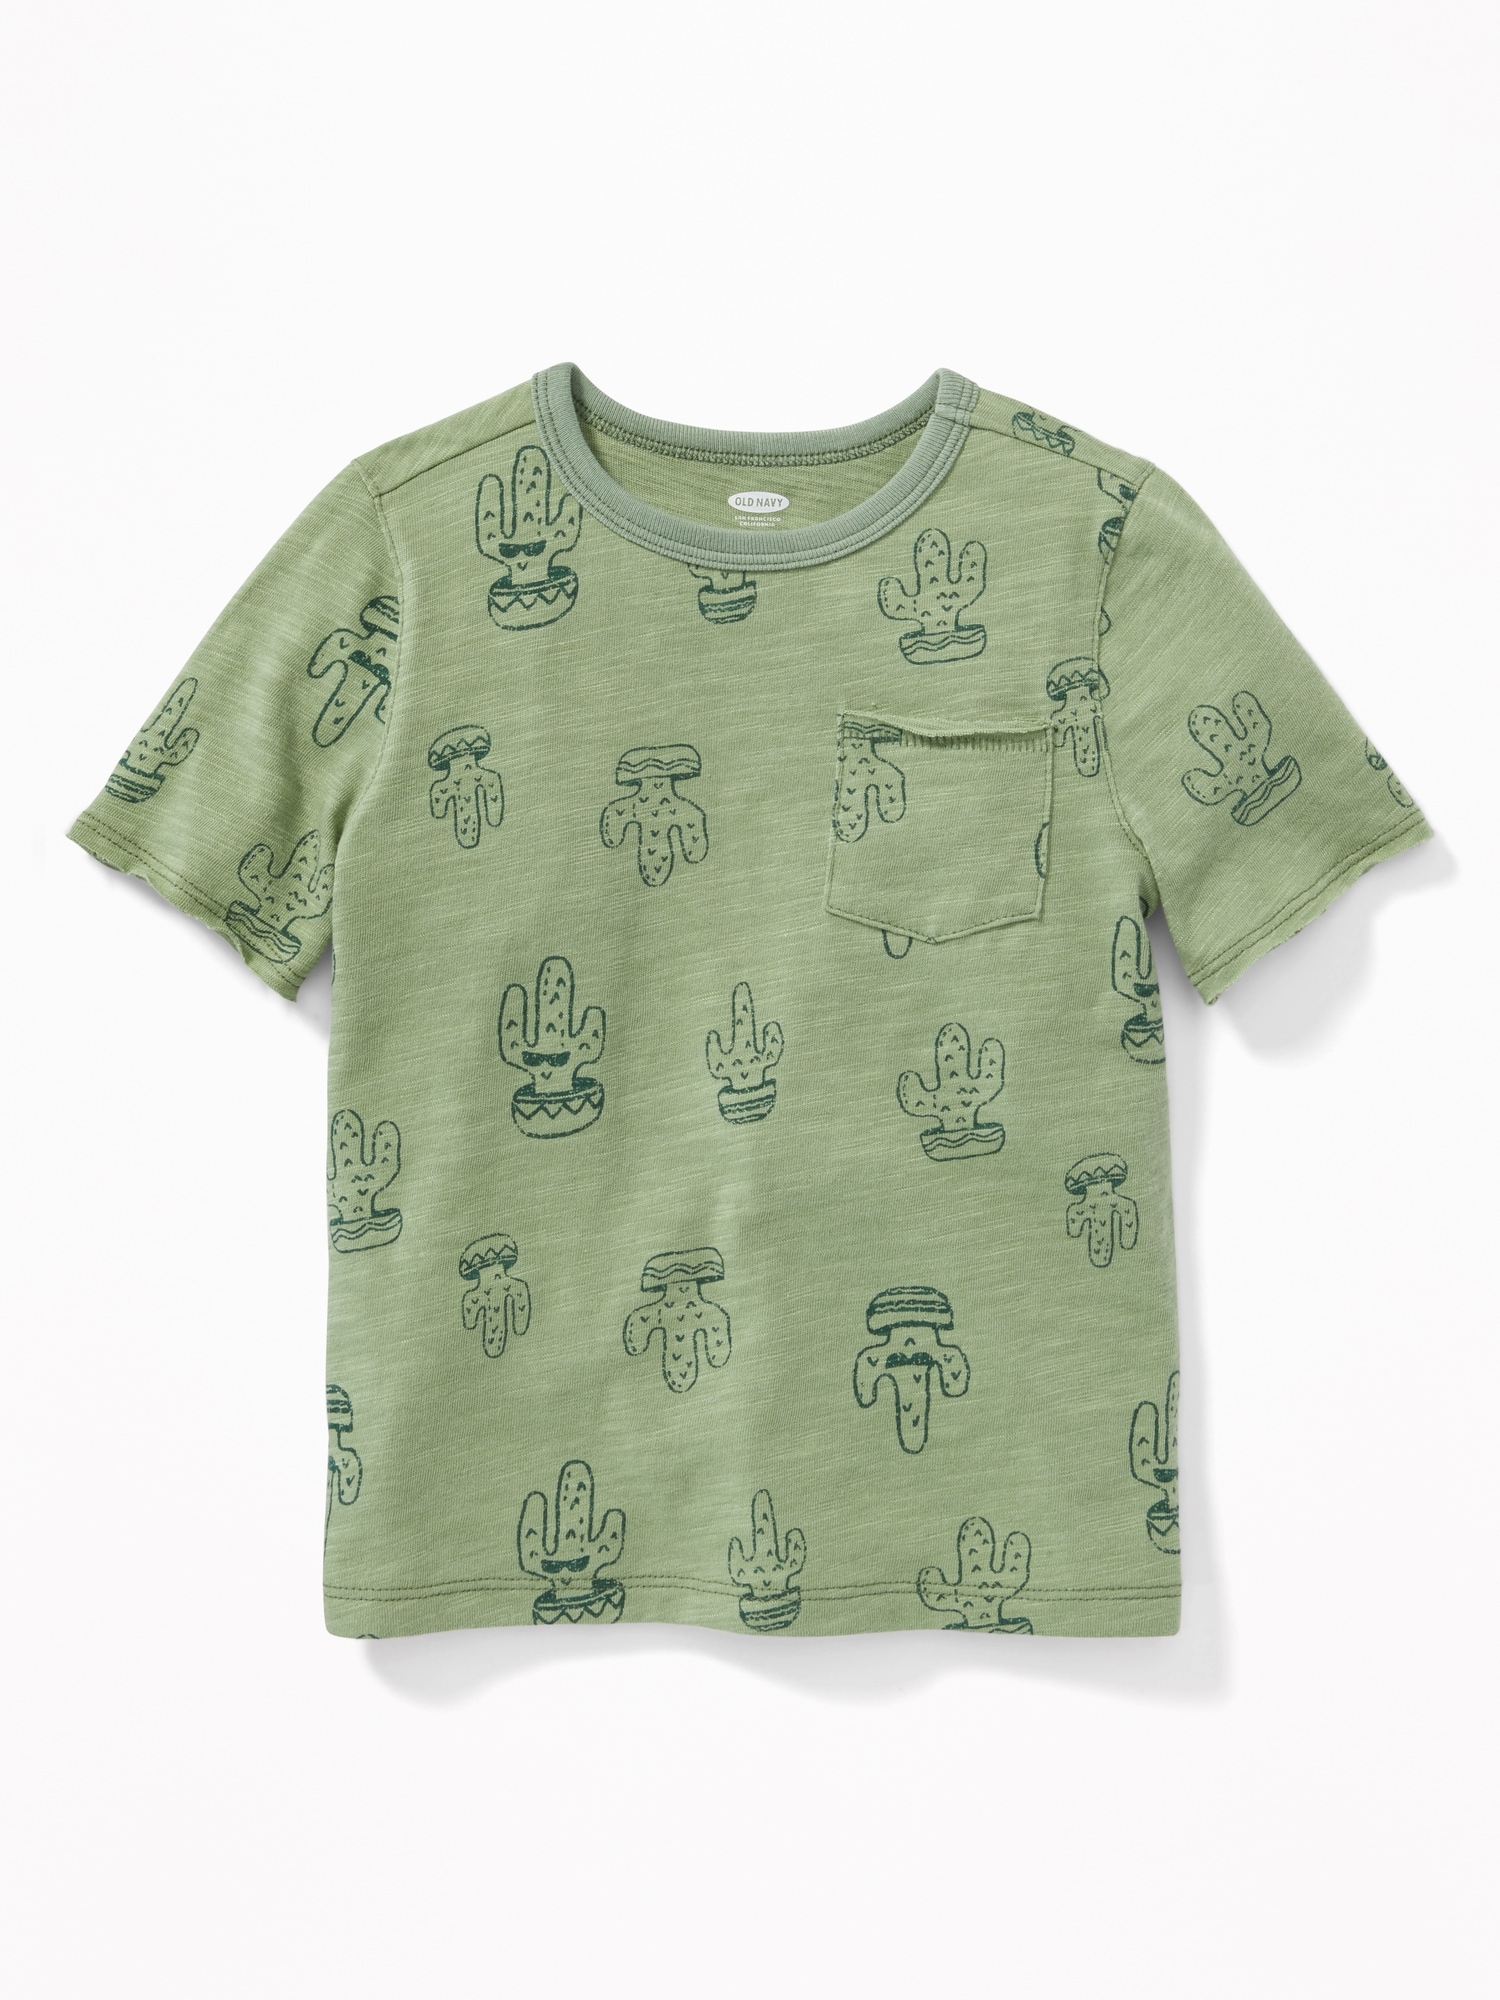 Printed Pocket Tee for Toddler Boys | Old Navy